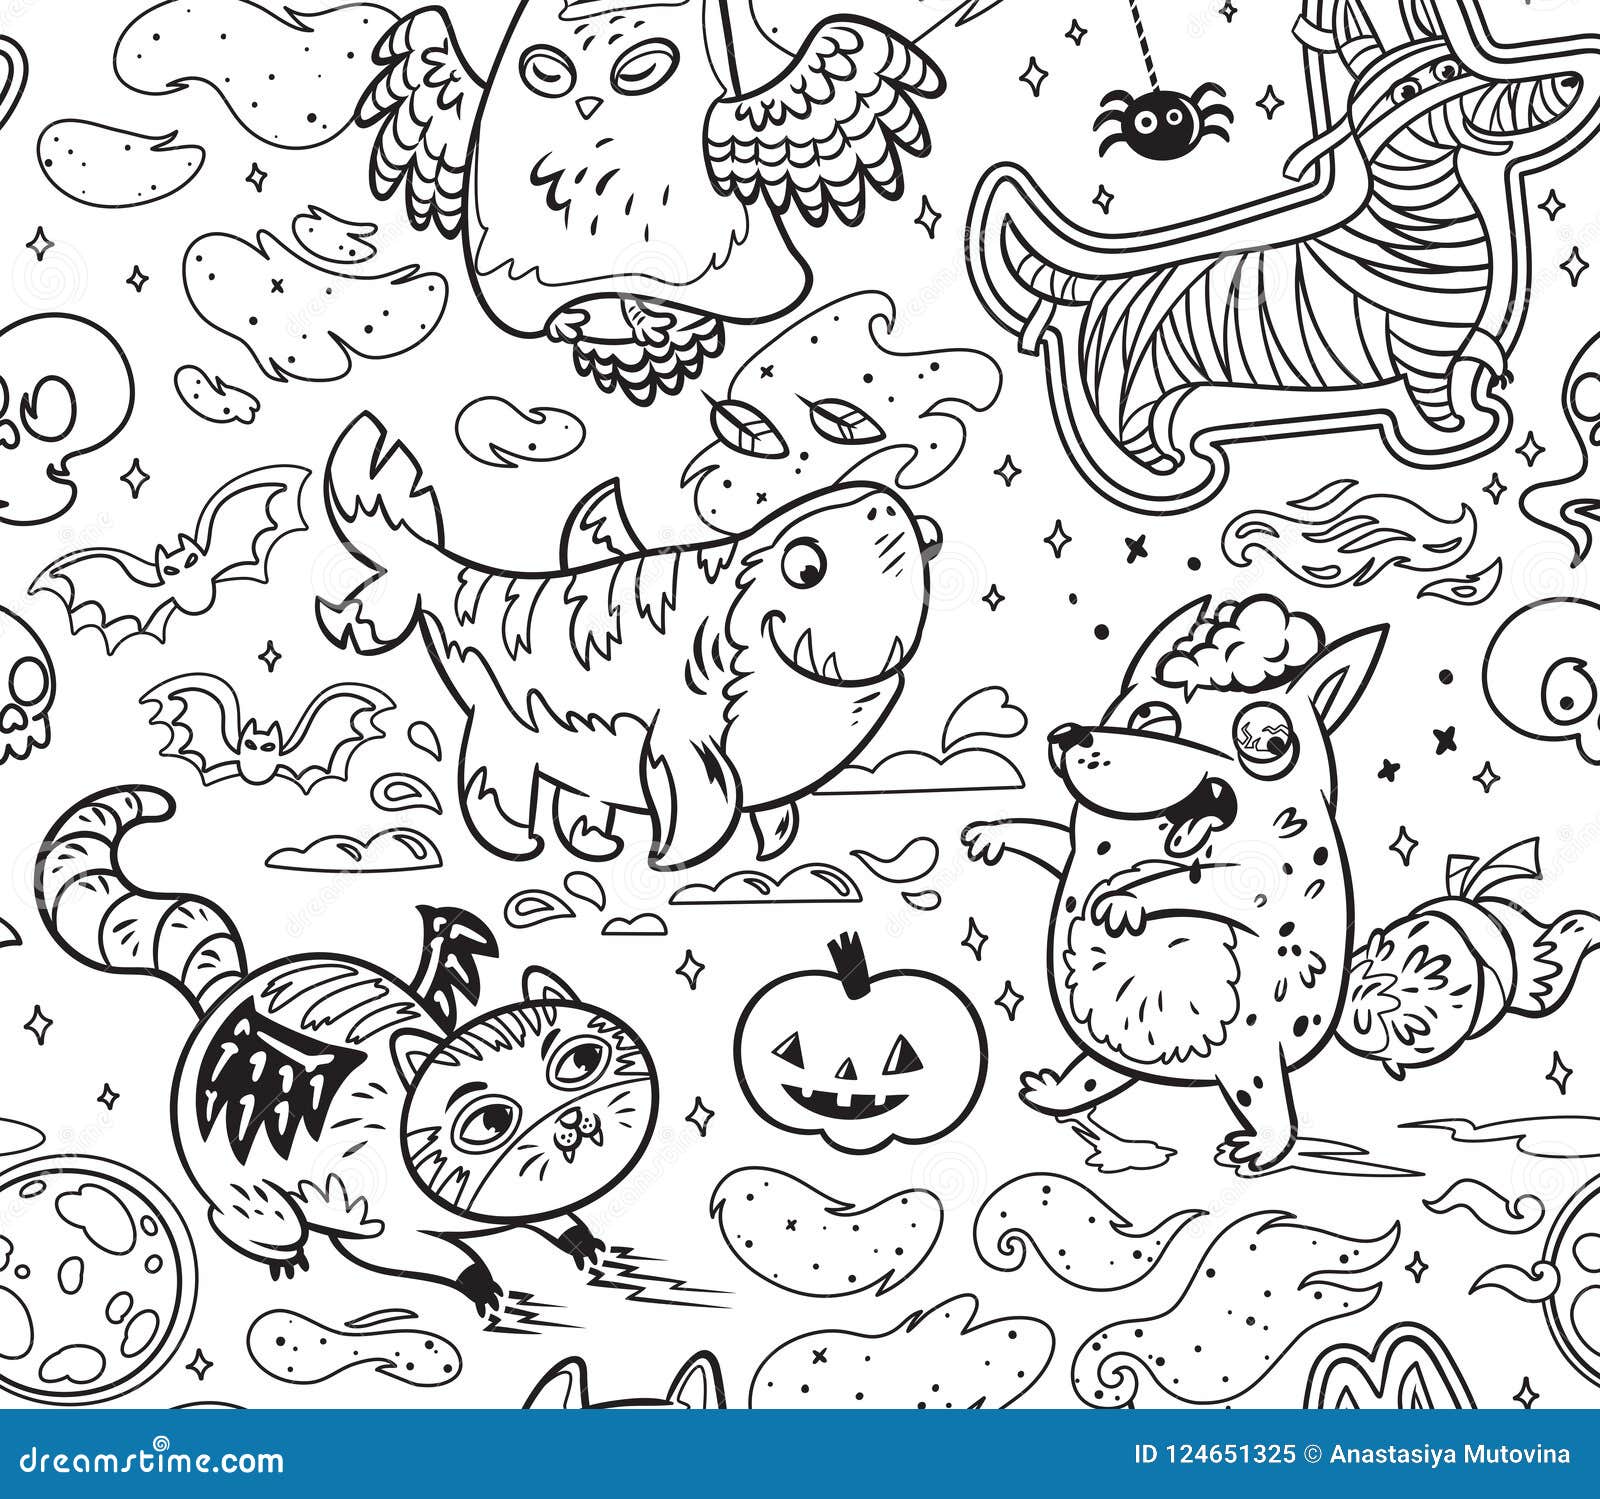 Halloween surface pattern with cute cartoon animals in outline black and white vector illustration stock vector